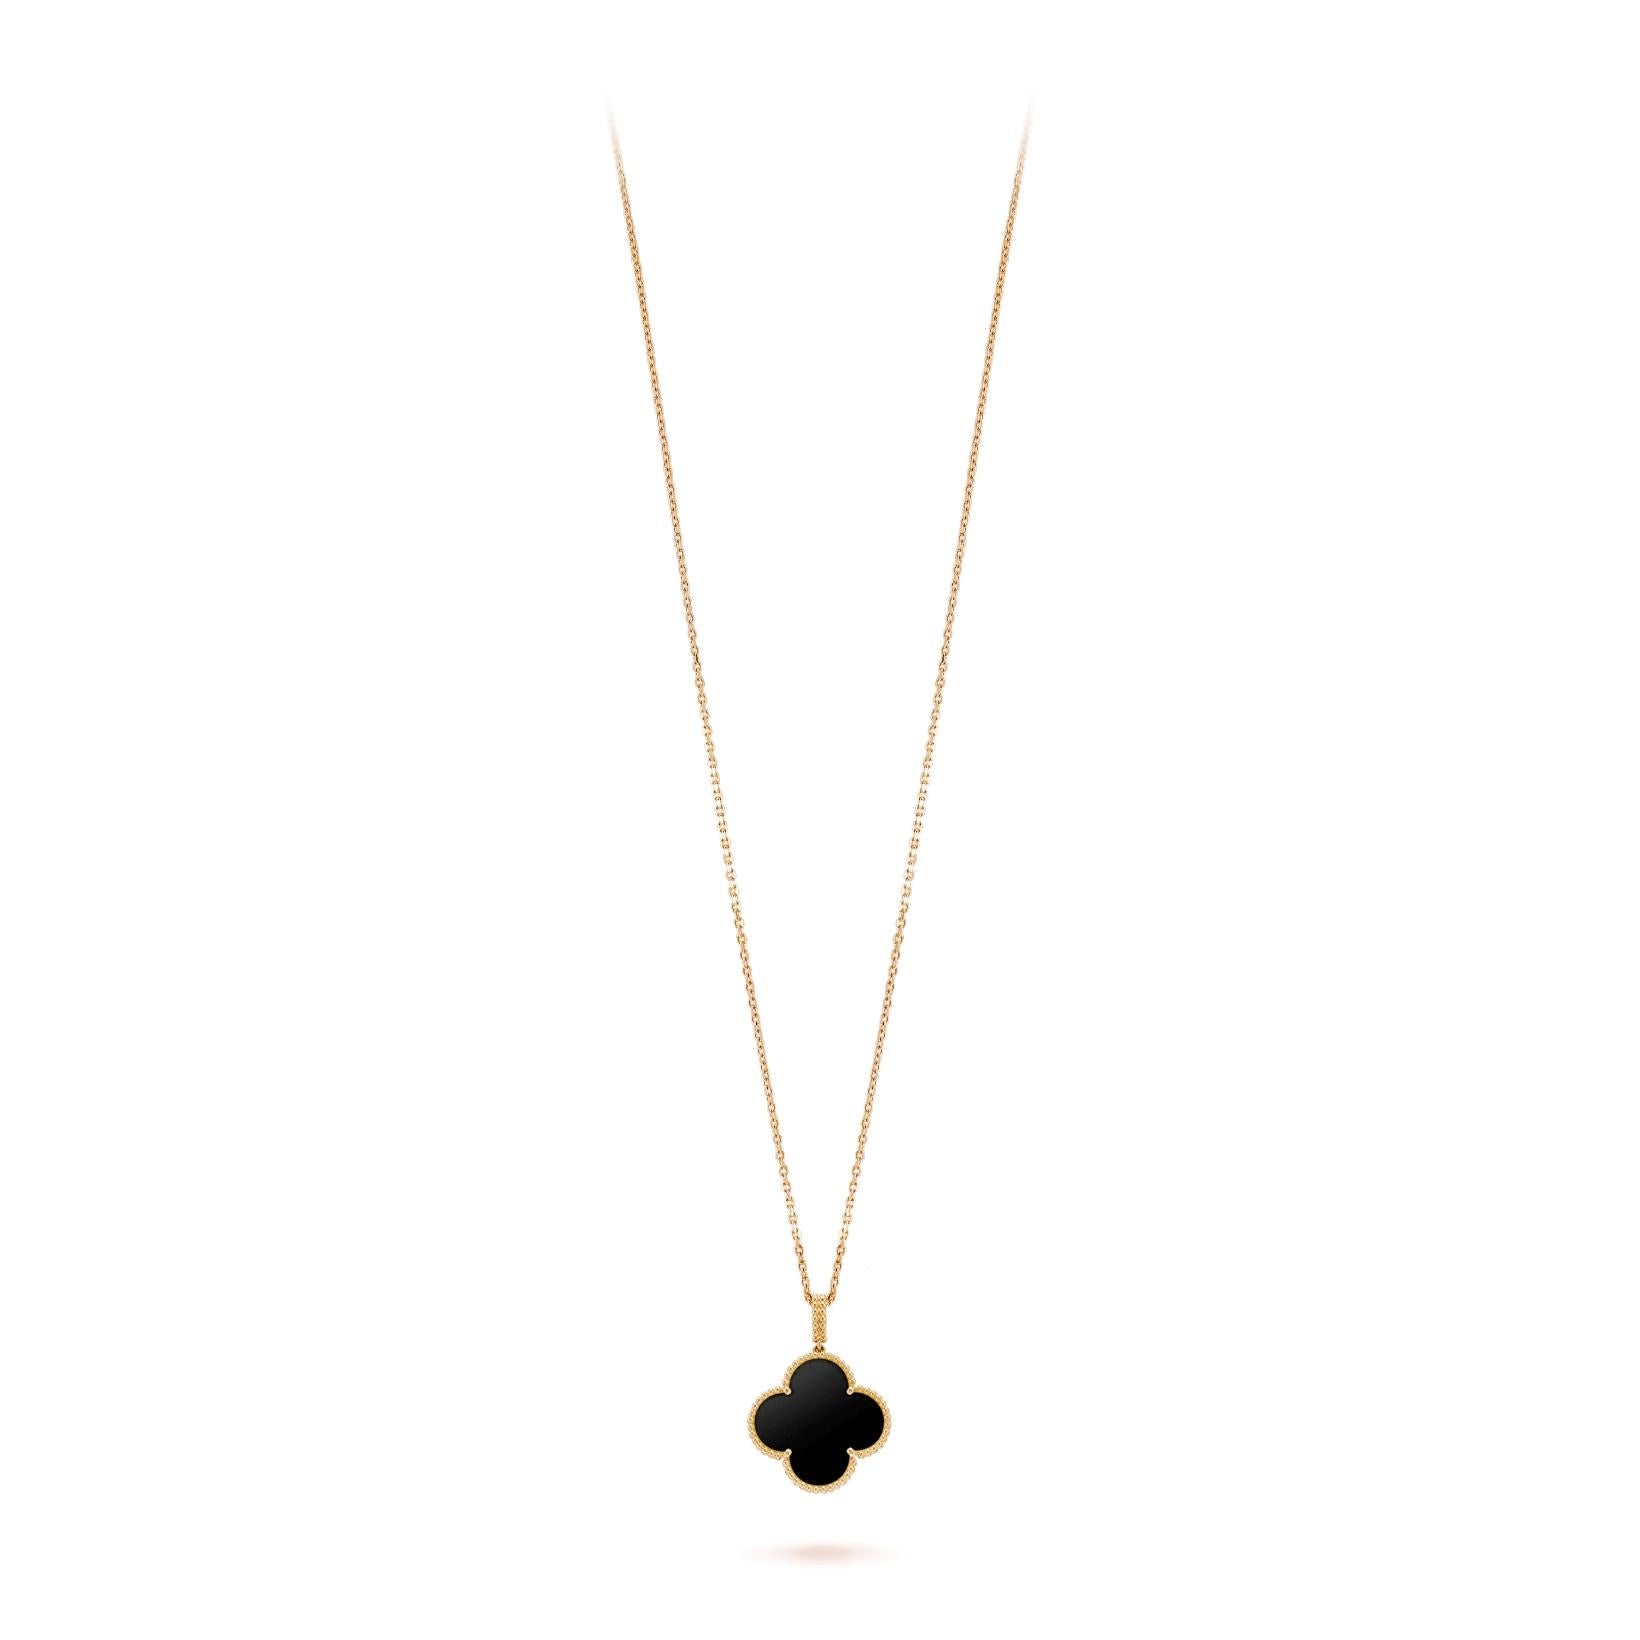 This iconic design is crafted in 18k yellow gold. The famed Alhambra design is thought to derive luck from these magical charms.  This single motif long necklace is truly exceptional. the necklace measures 35.43